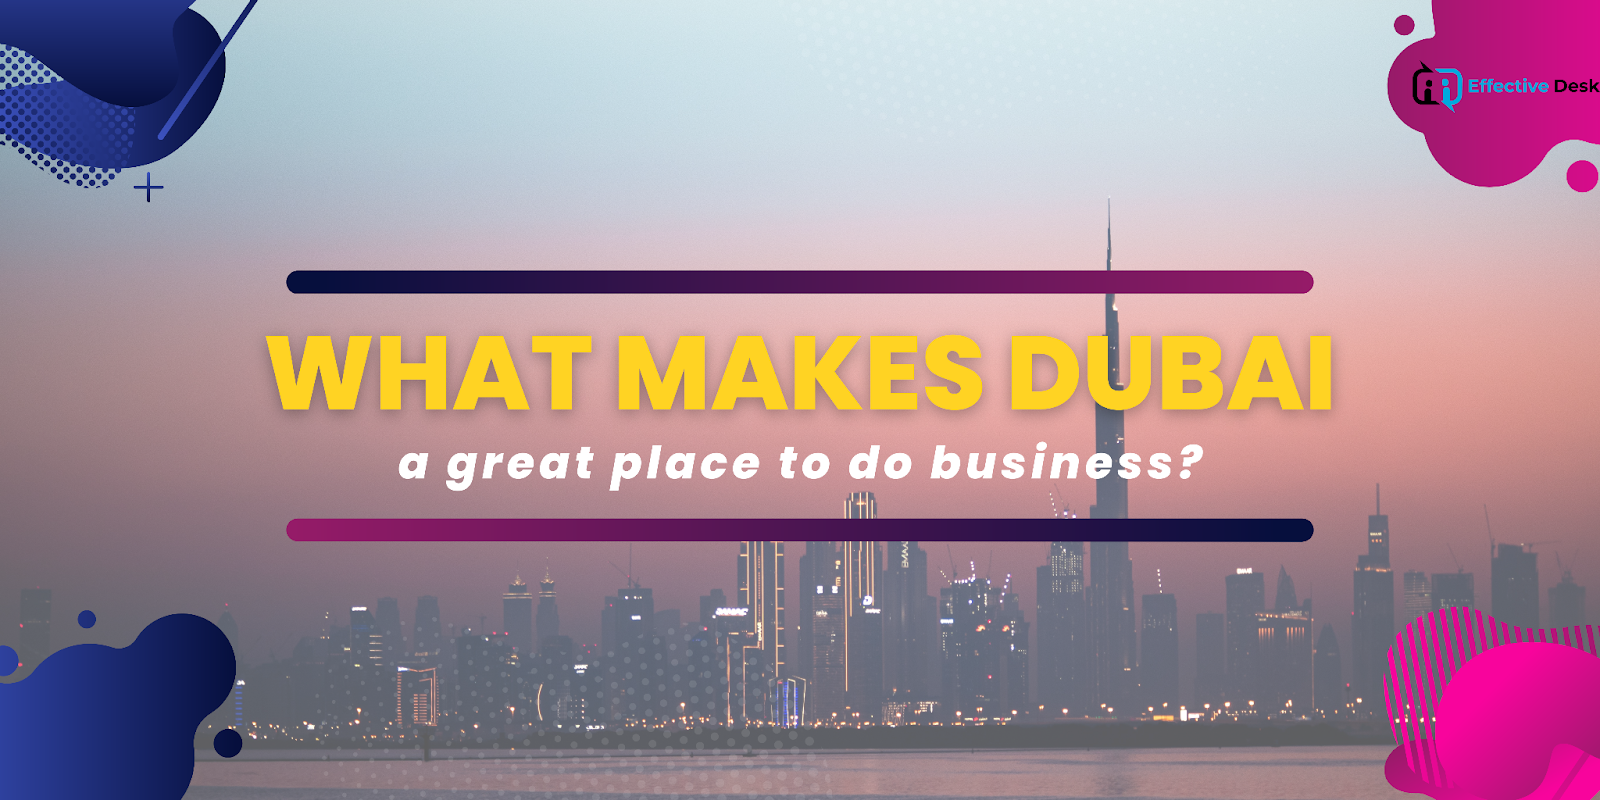 What makes Dubai a great place to do business?
